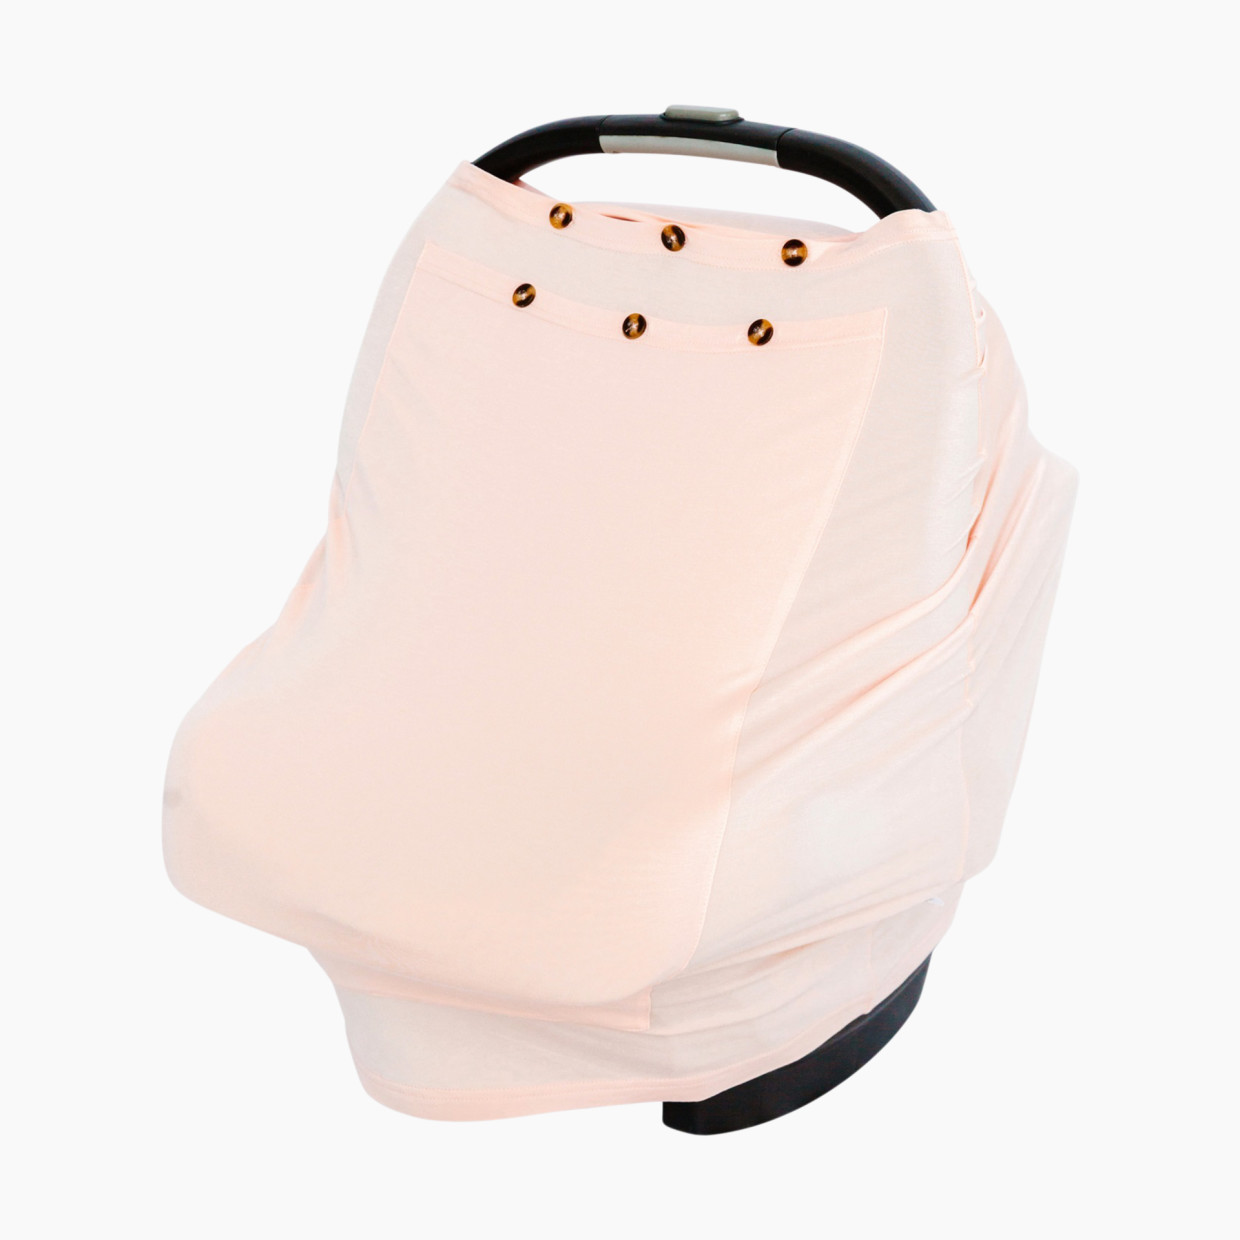 Snuggle Shield LUXE Protection Bamboo Multi-Use Antimicrobial Air Filtering Infant Cover - Pink, Os.